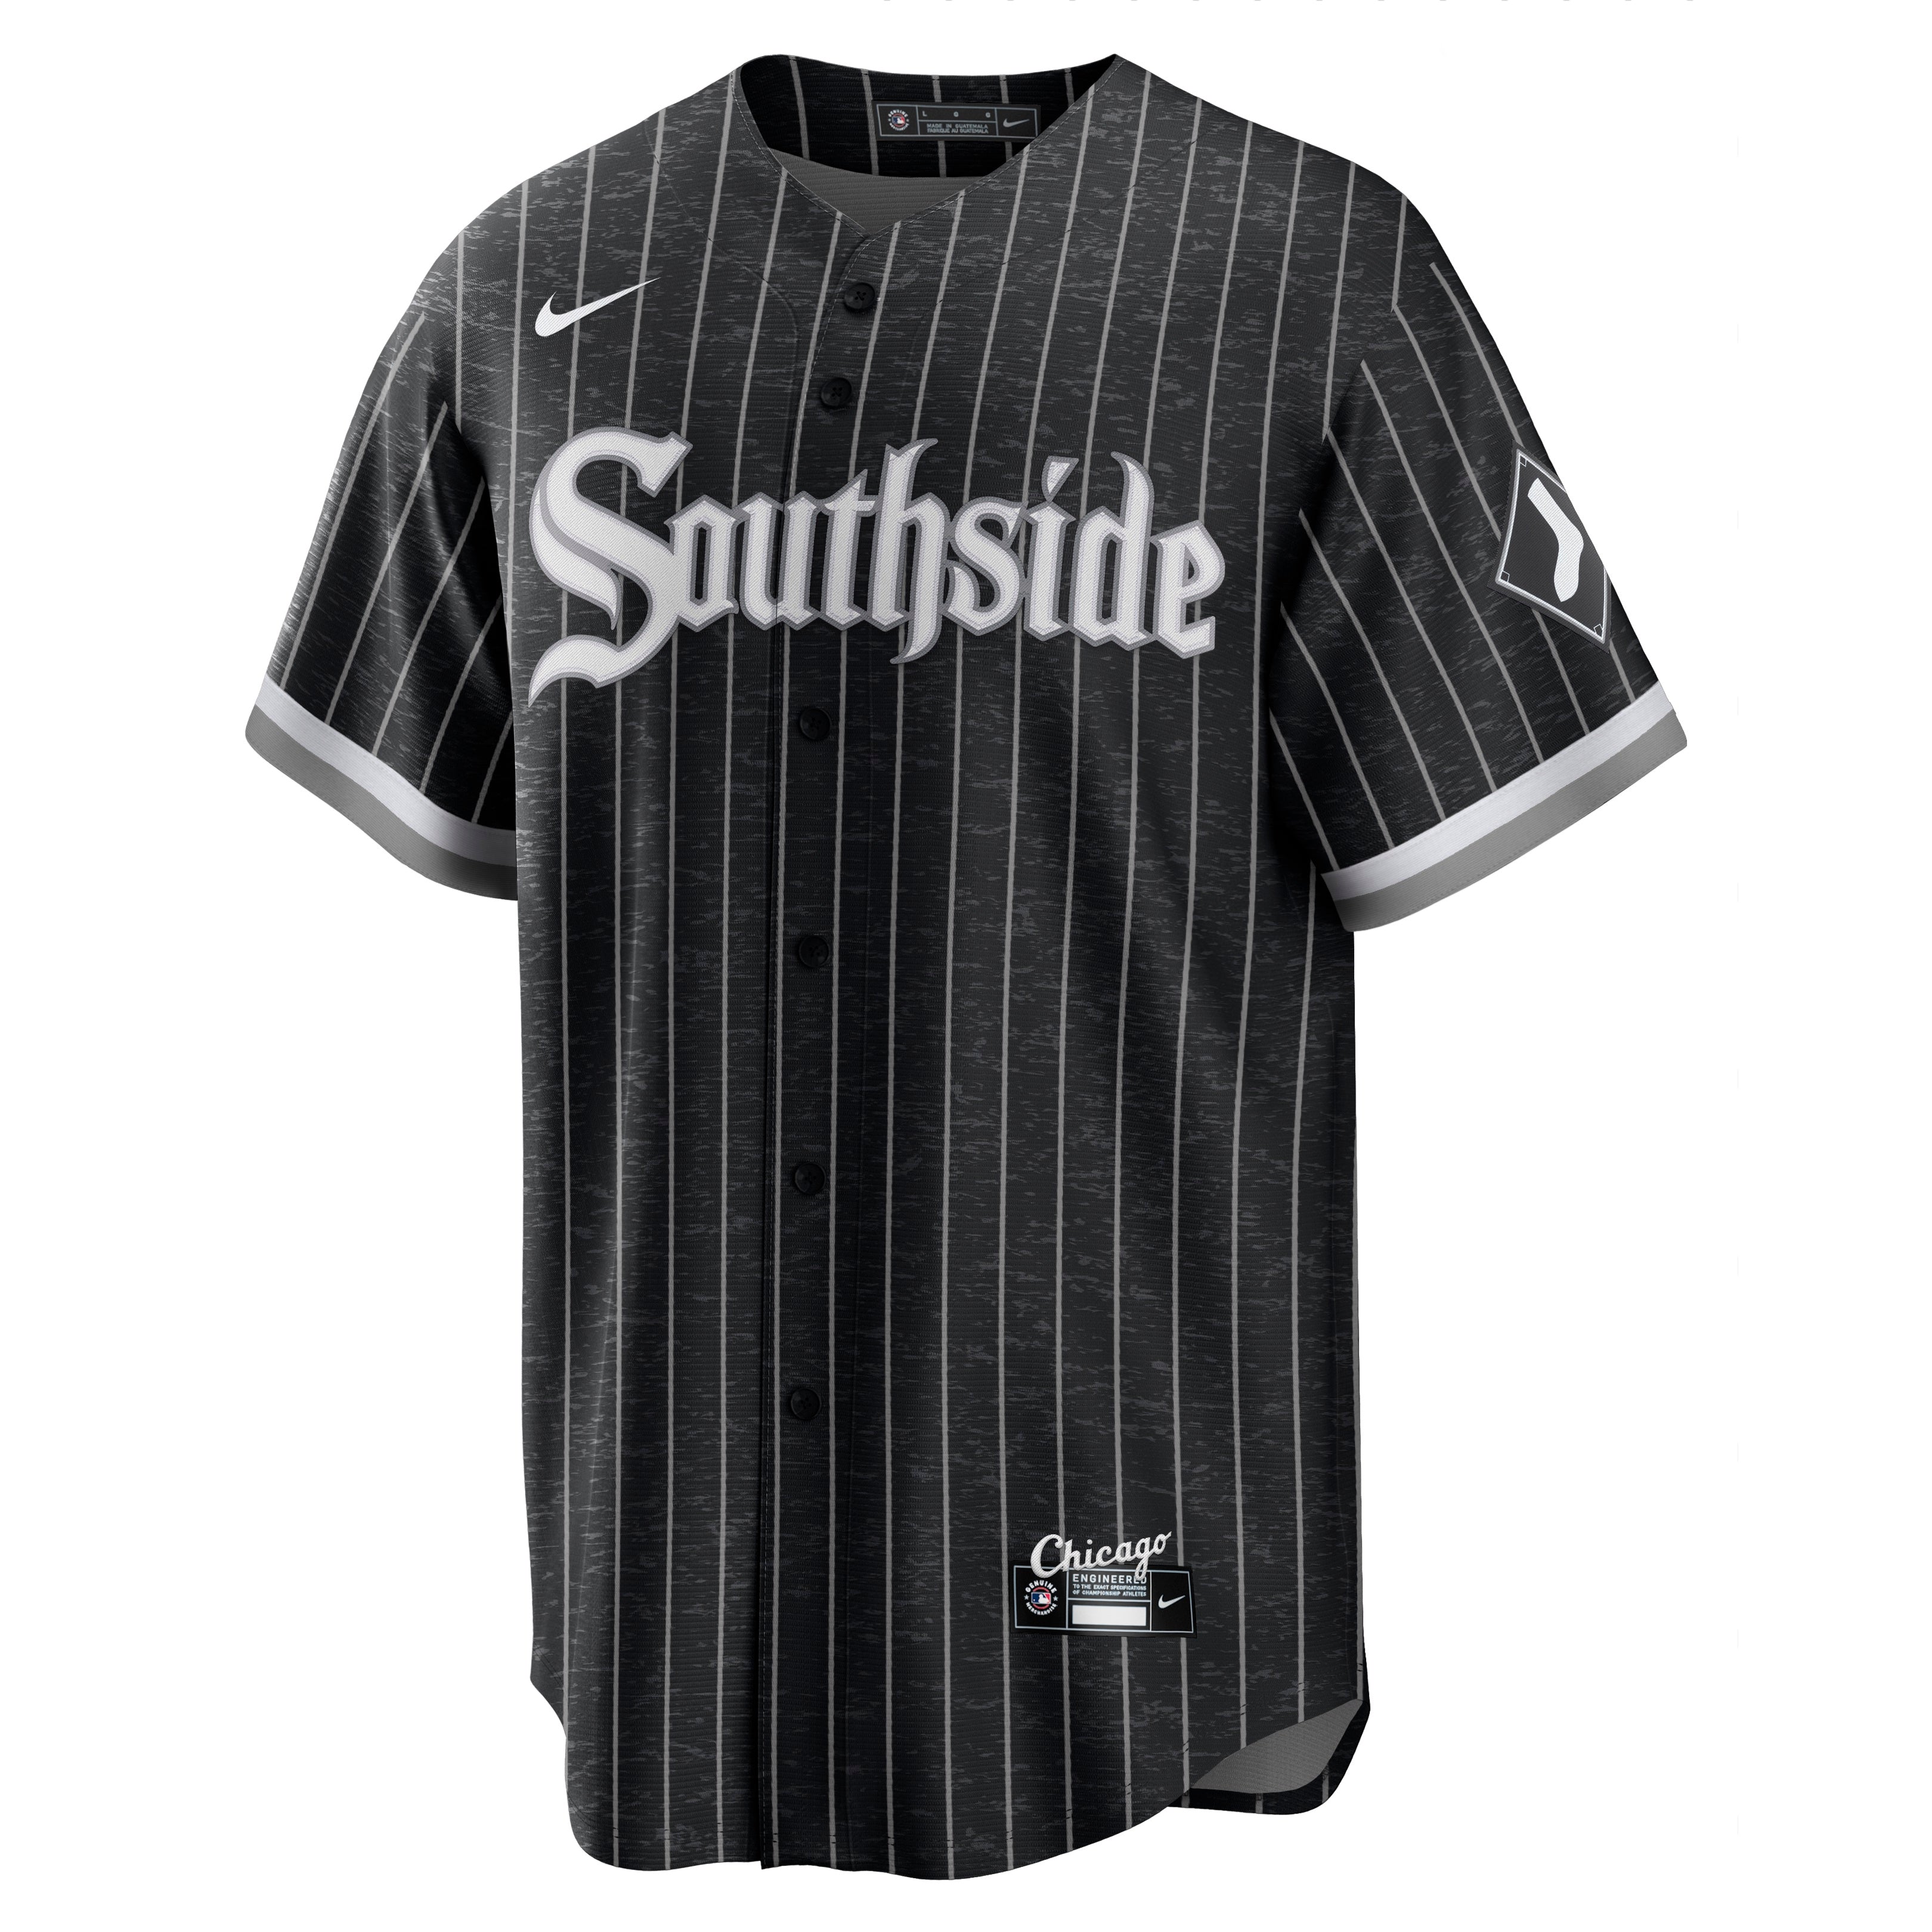 White Sox City Connect jerseys: New Chicago uniforms honor South Side